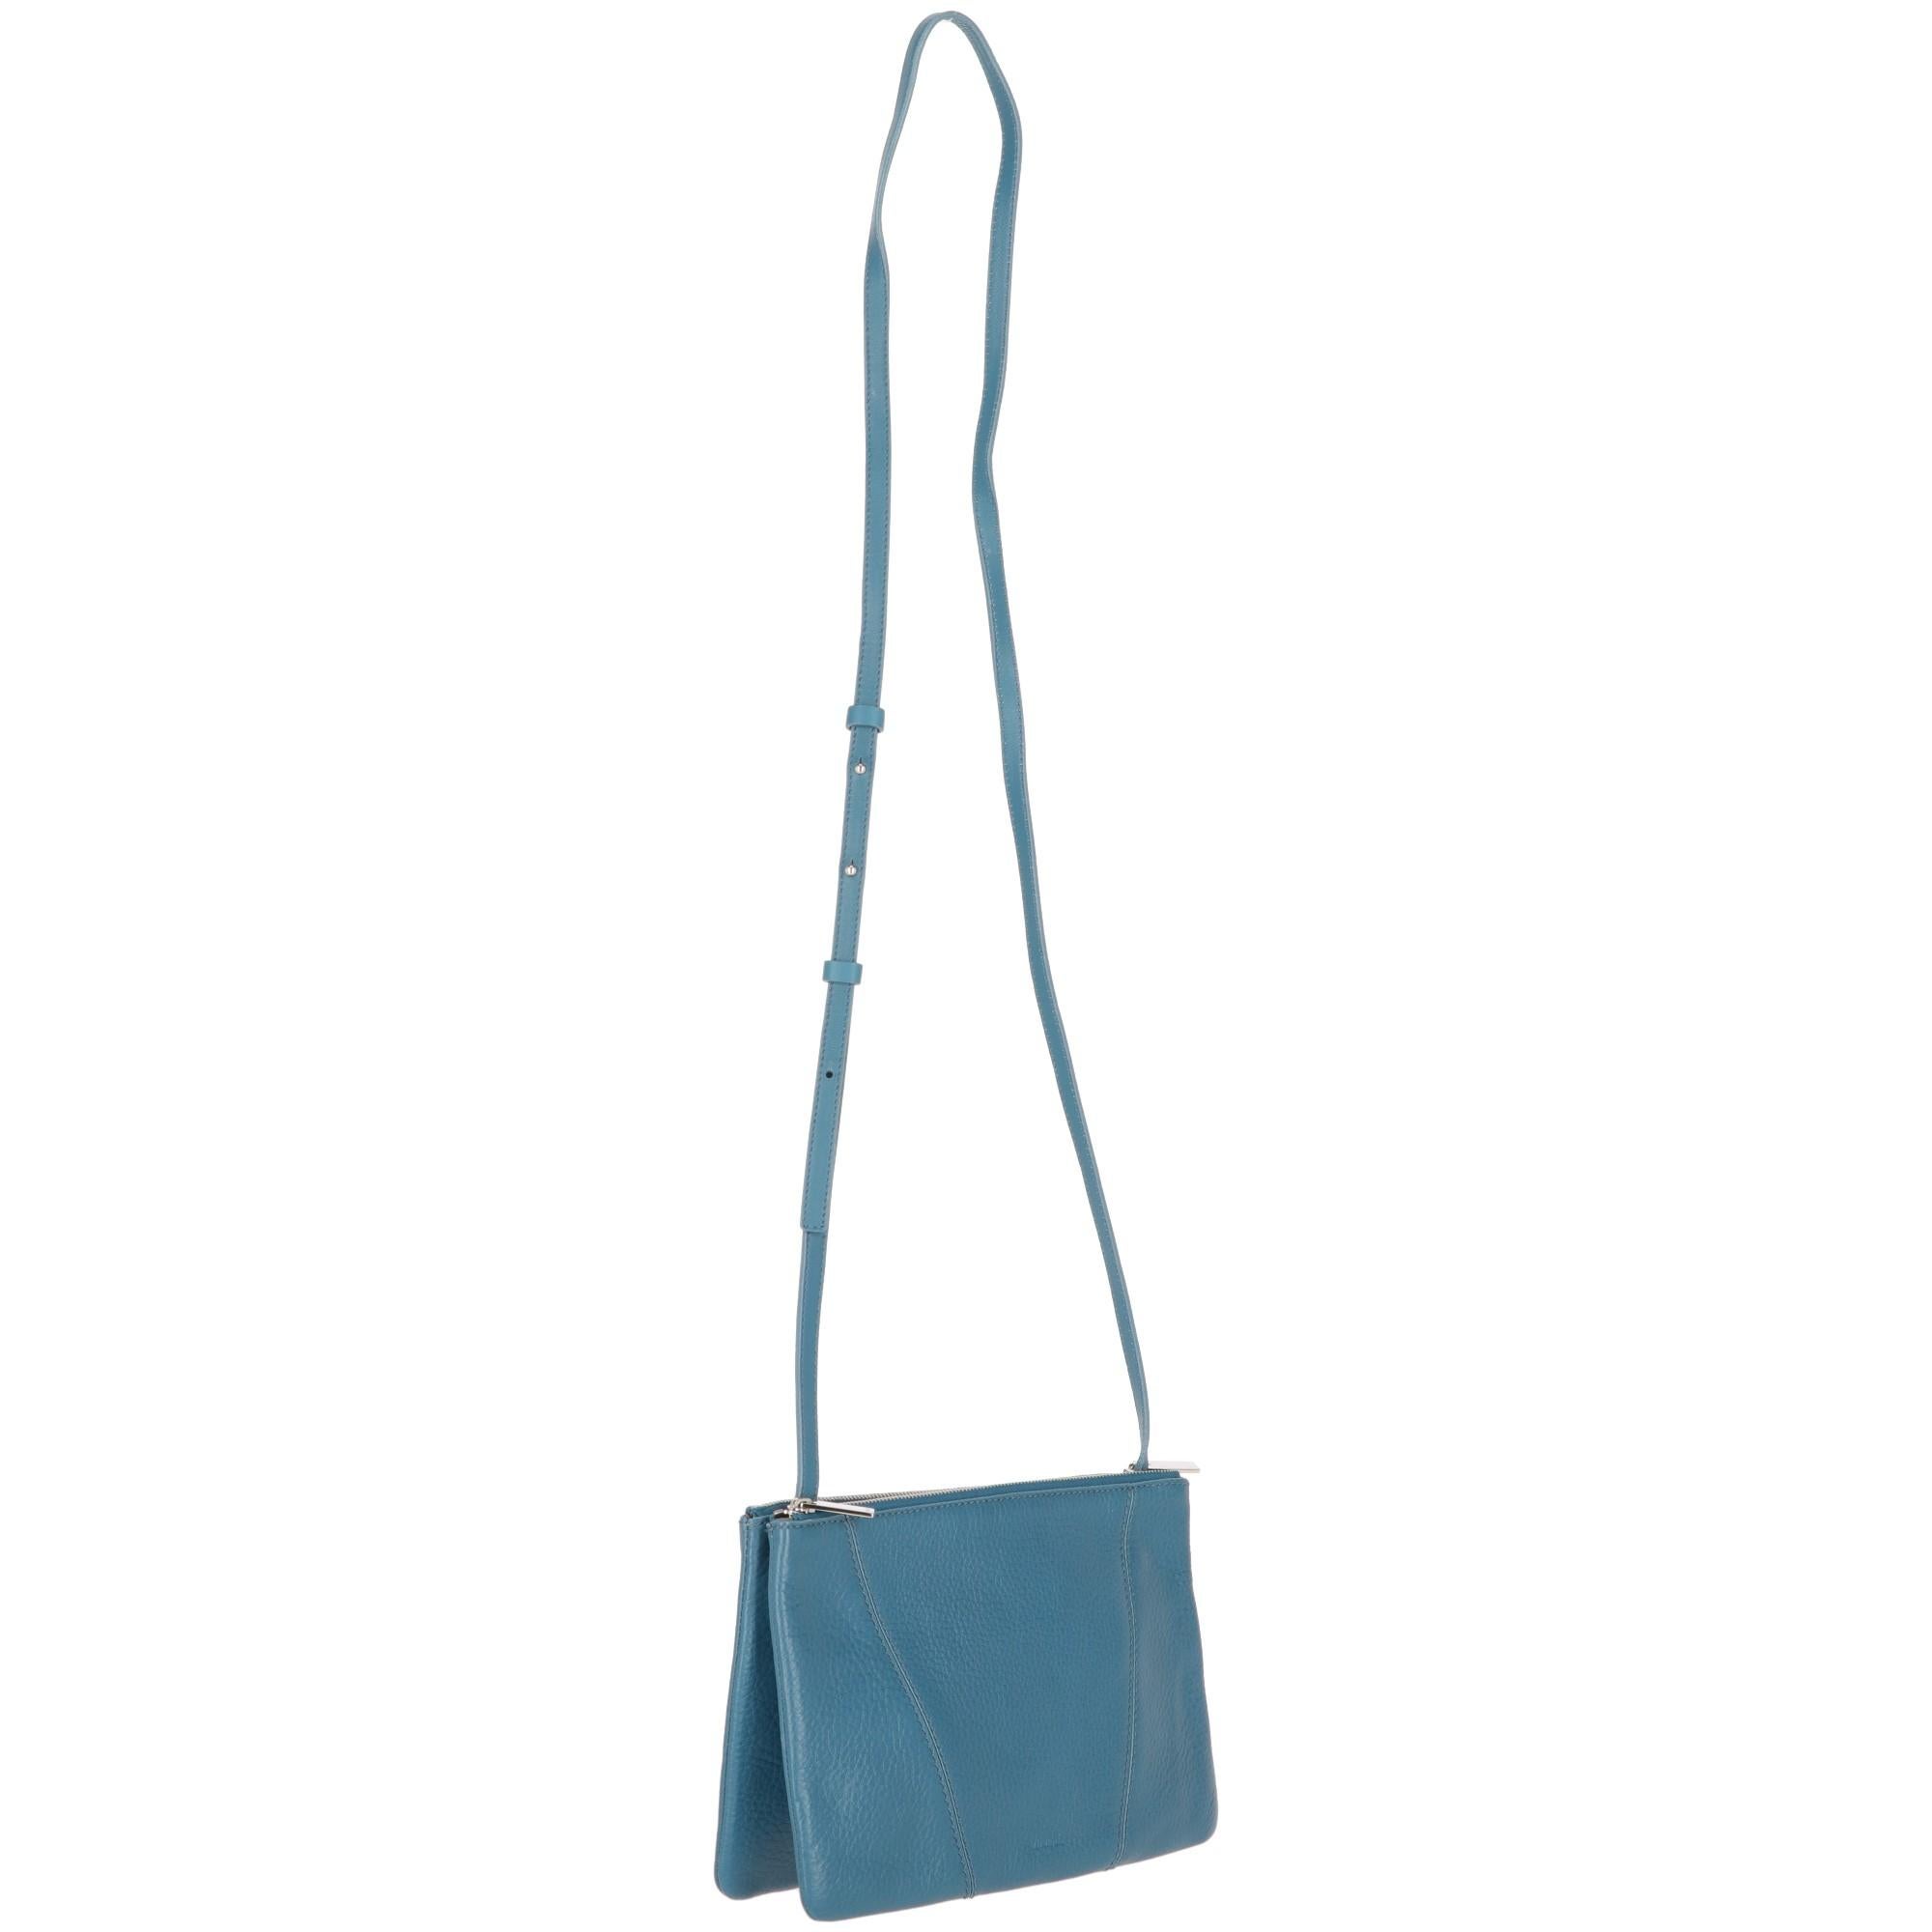 A.N.G.E.L.O. VINTAGE – ITALY

Vince real leather shoulder bag in sugar paper color with adjustable shoulder strap. The bag is composed by two silver-tone metal zipped clutch and merged through metal press studs. Lined in grey cotton.

Years: